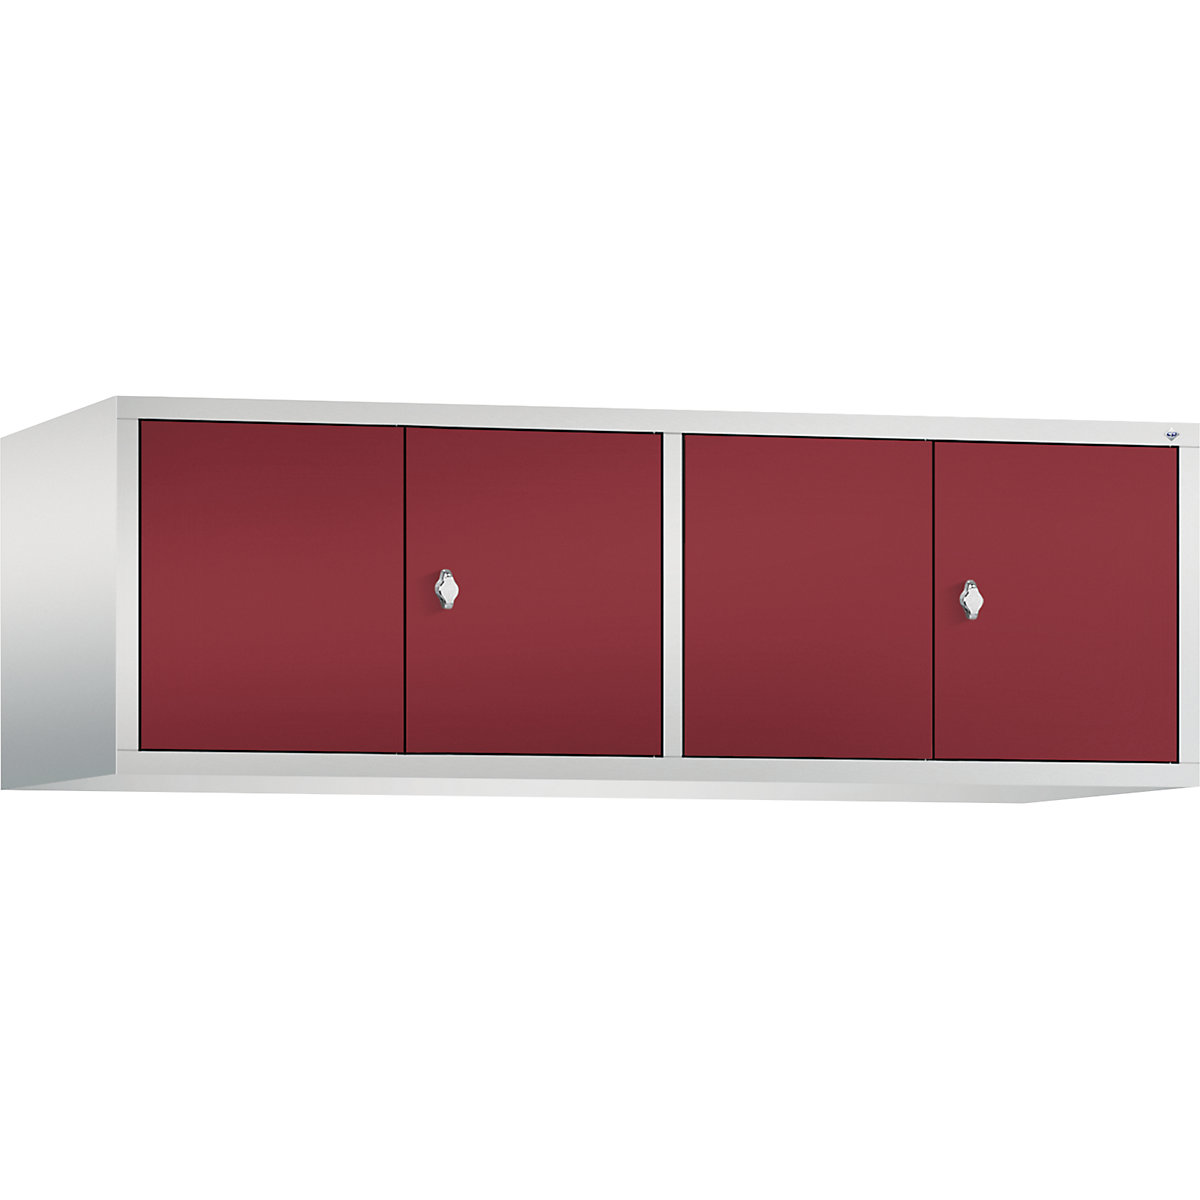 CLASSIC add-on cupboard, doors close in the middle – C+P, 4 compartments, compartment width 400 mm, light grey / ruby red-11